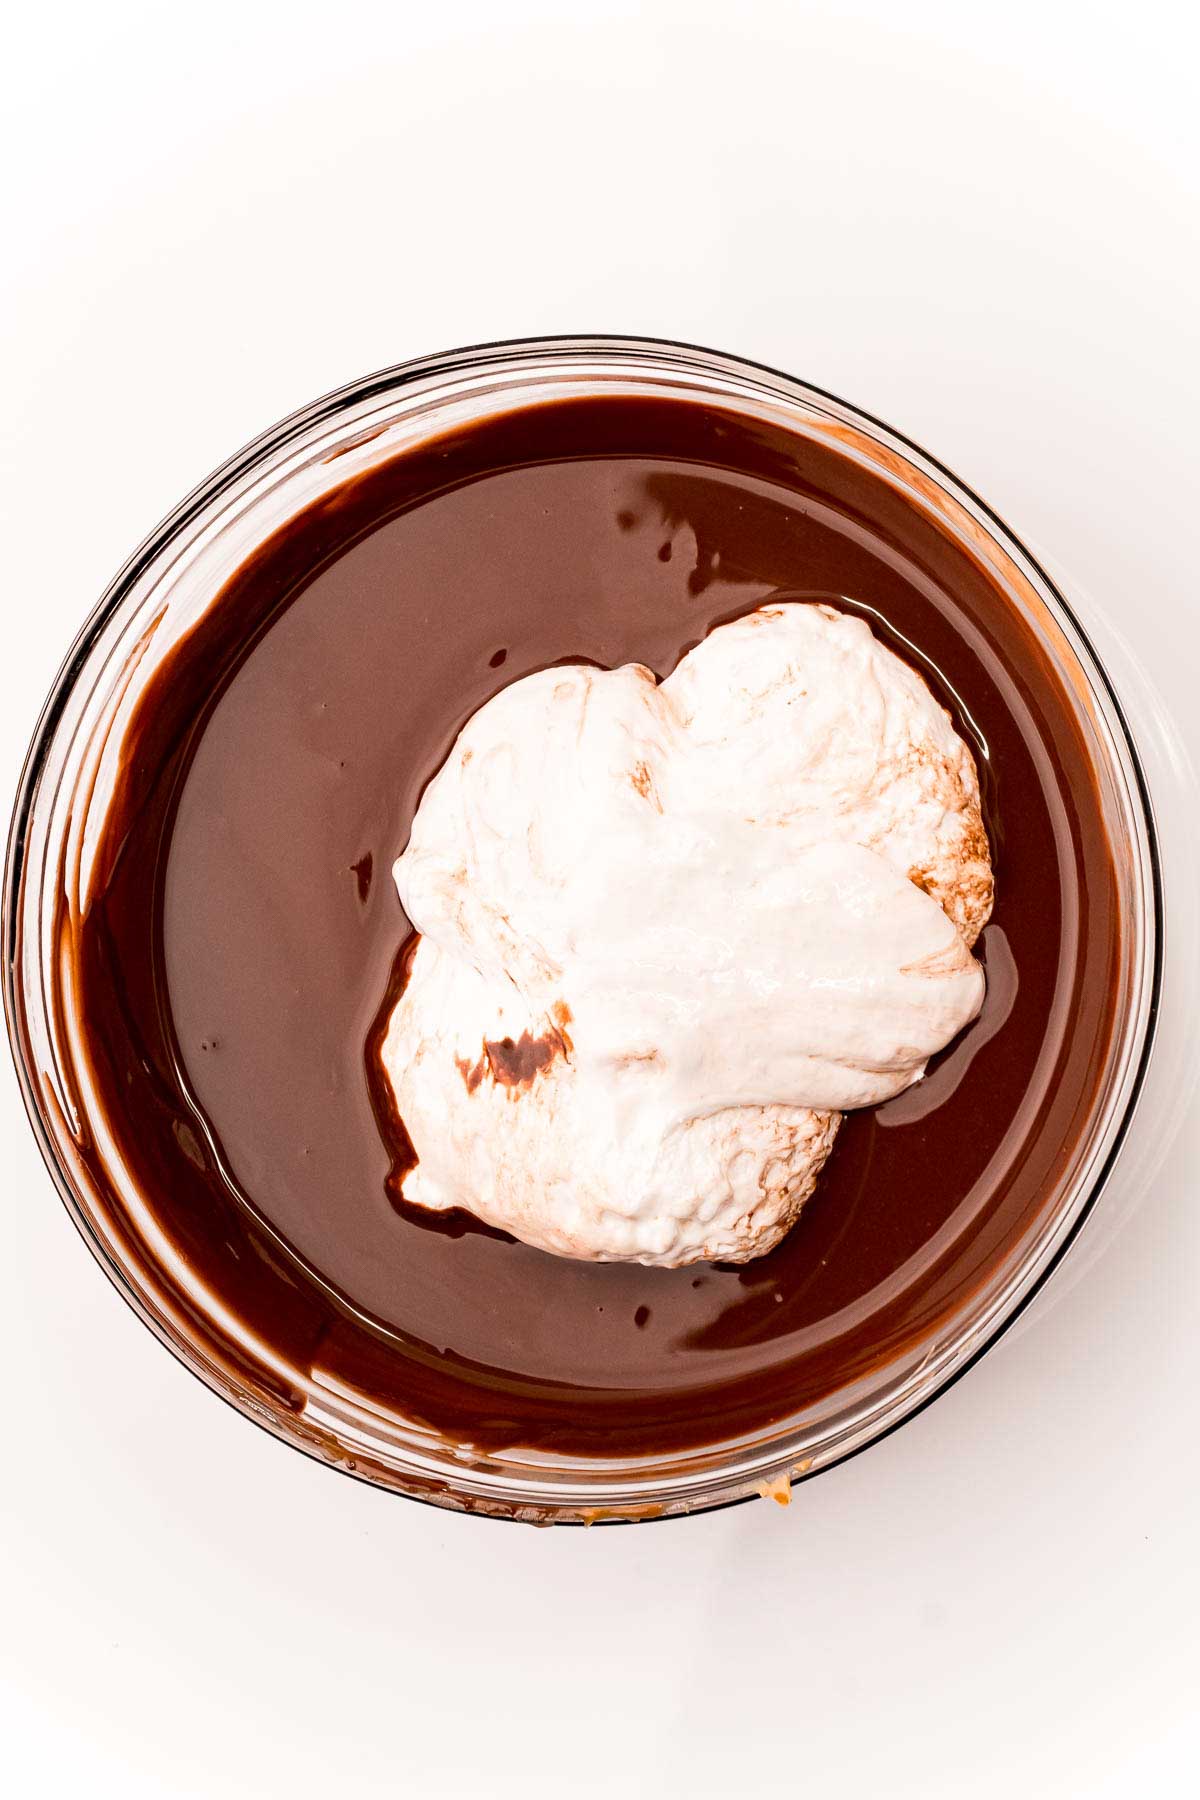 melted chocolate and marshmallow fluff